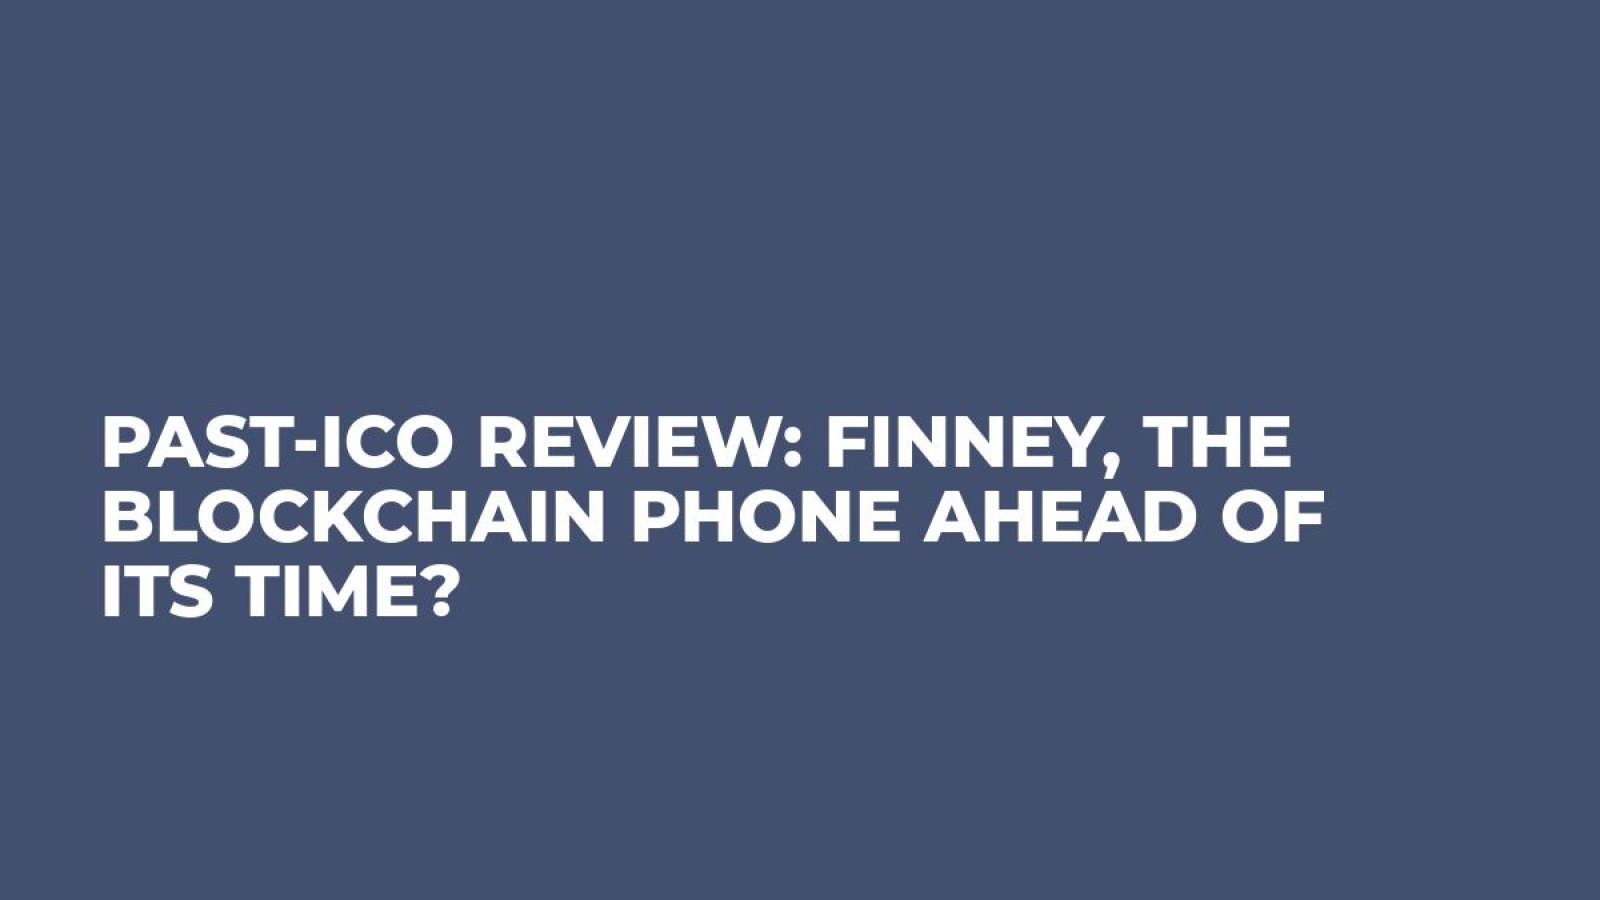 Past-ICO Review: Finney, the Blockchain Phone Ahead of its Time?